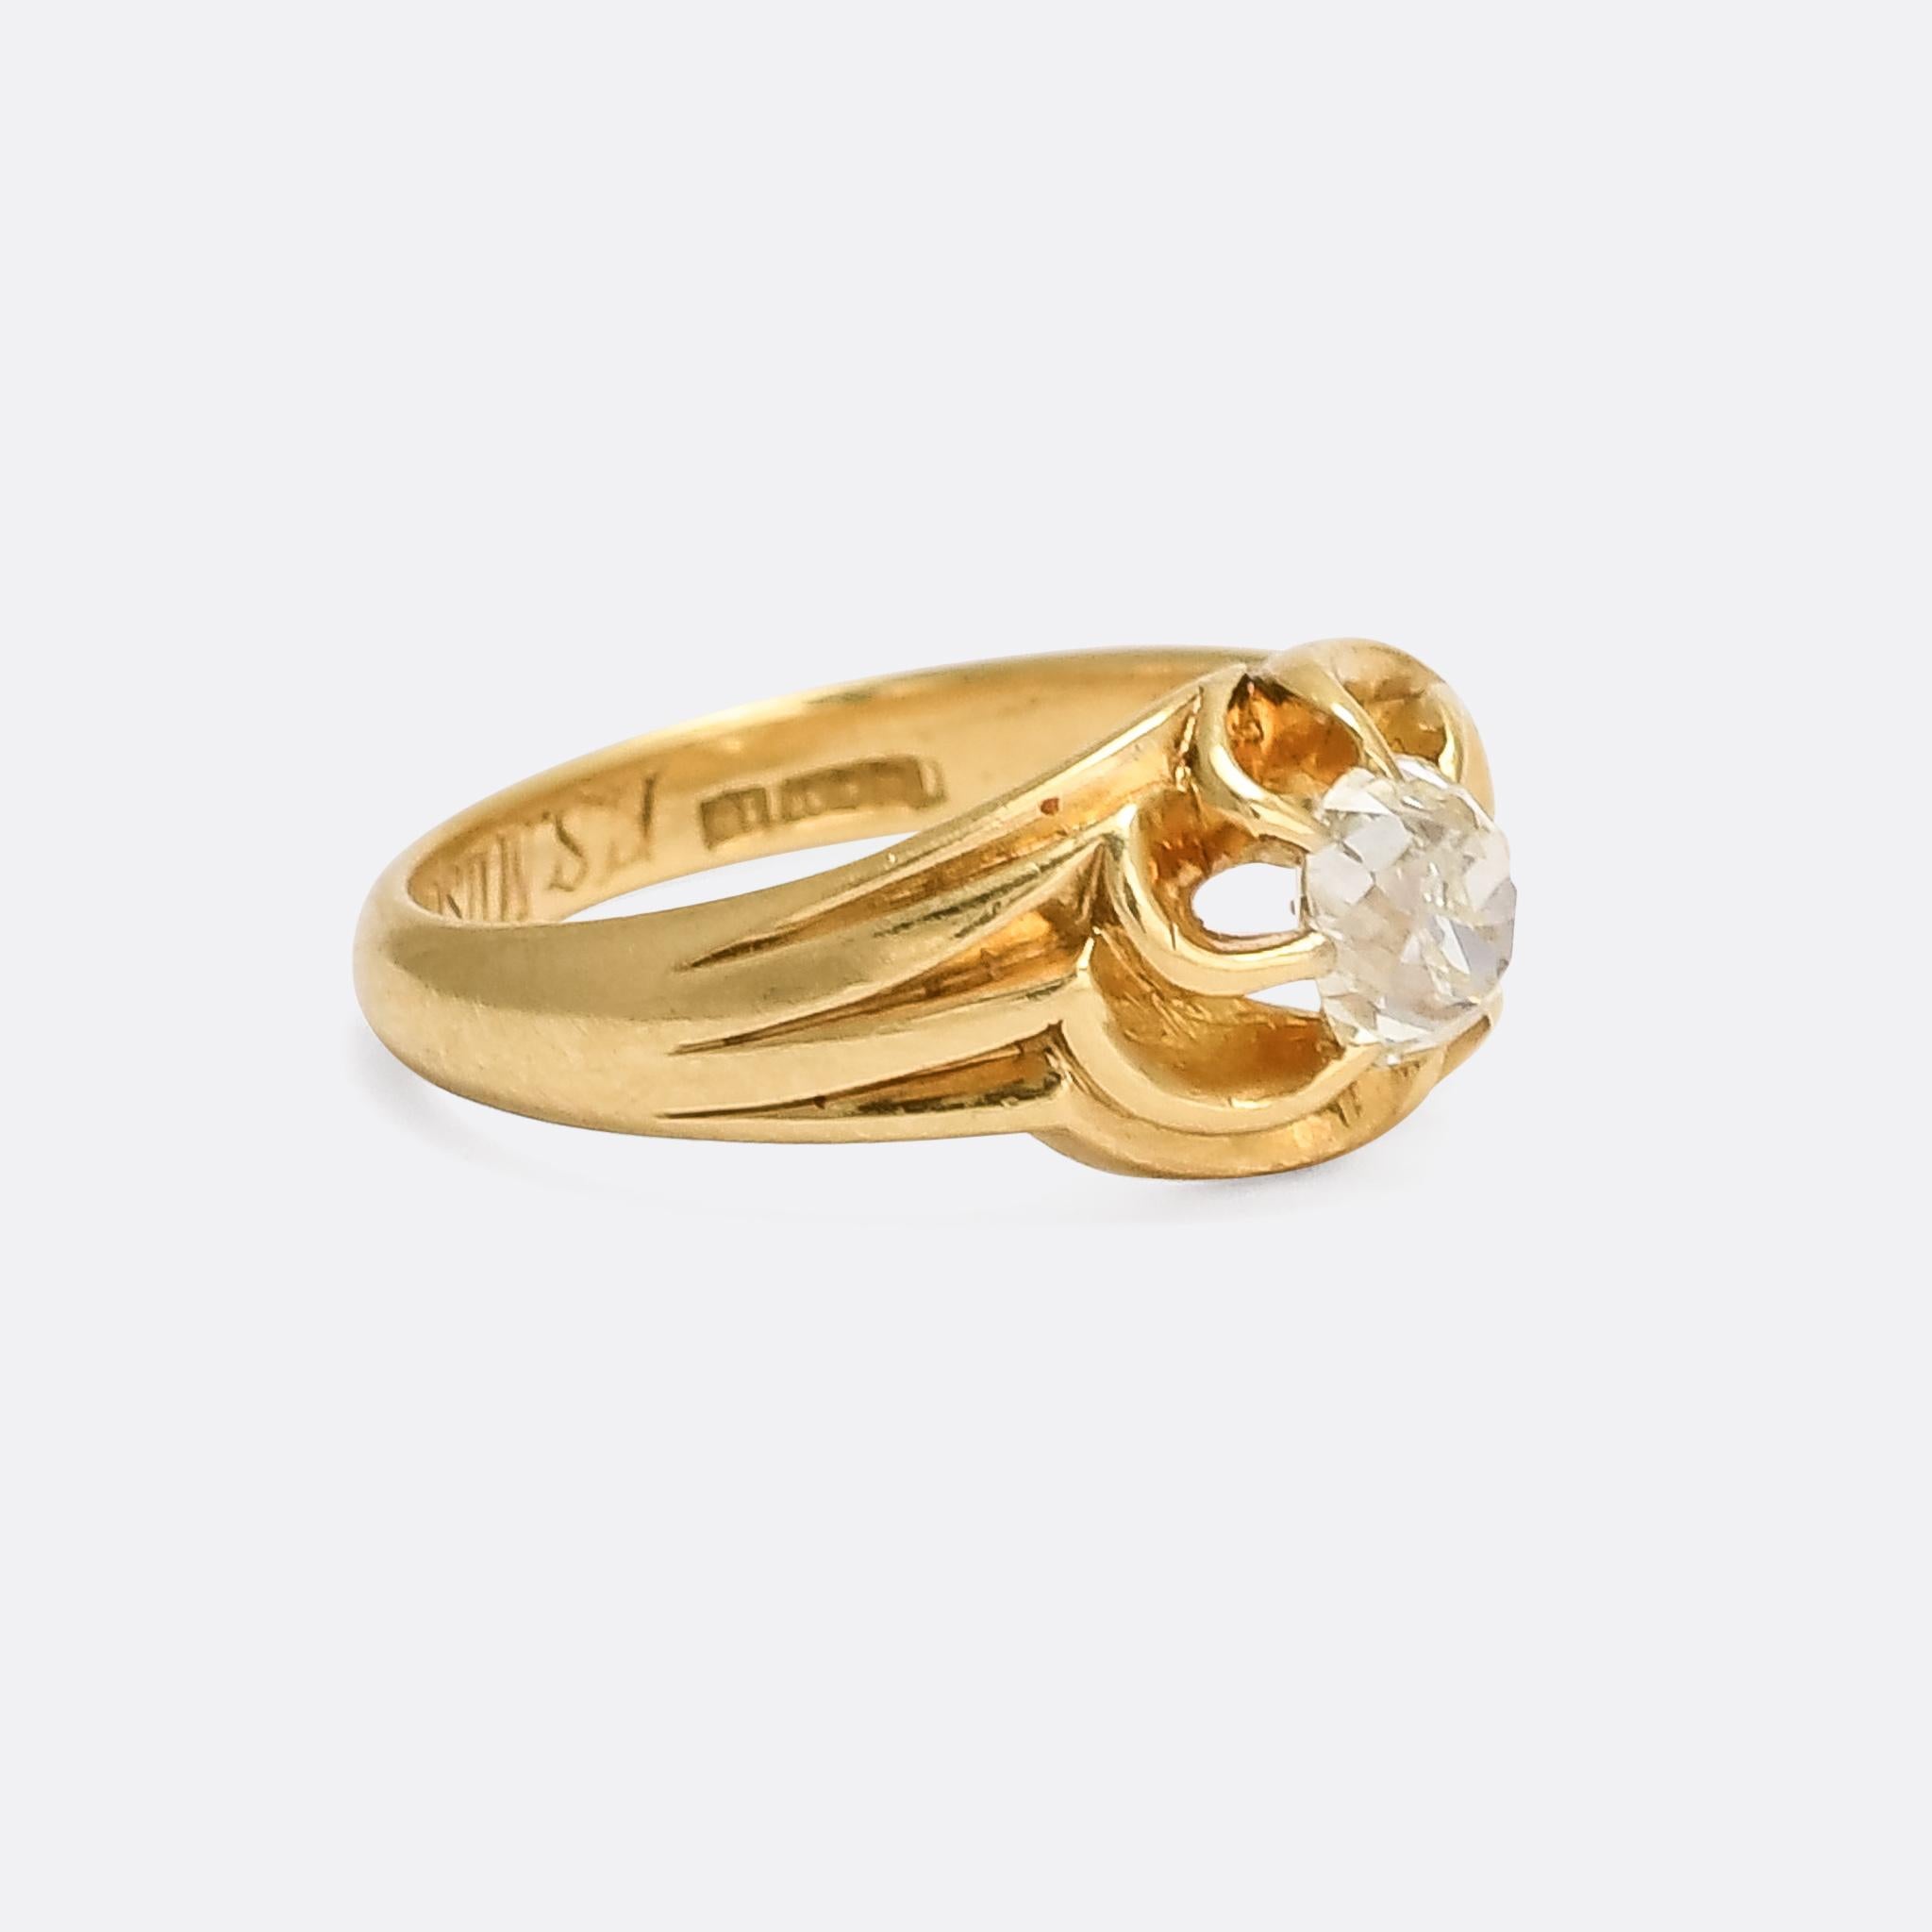 This ring is something of a hybrid in terms of style and period, artfully bridging the gap between Victorian and Art Nouveau. Stylistically it's a scalloped gypsy solitaire but with a literal twist: the claws are formed into a graceful swirl, met by